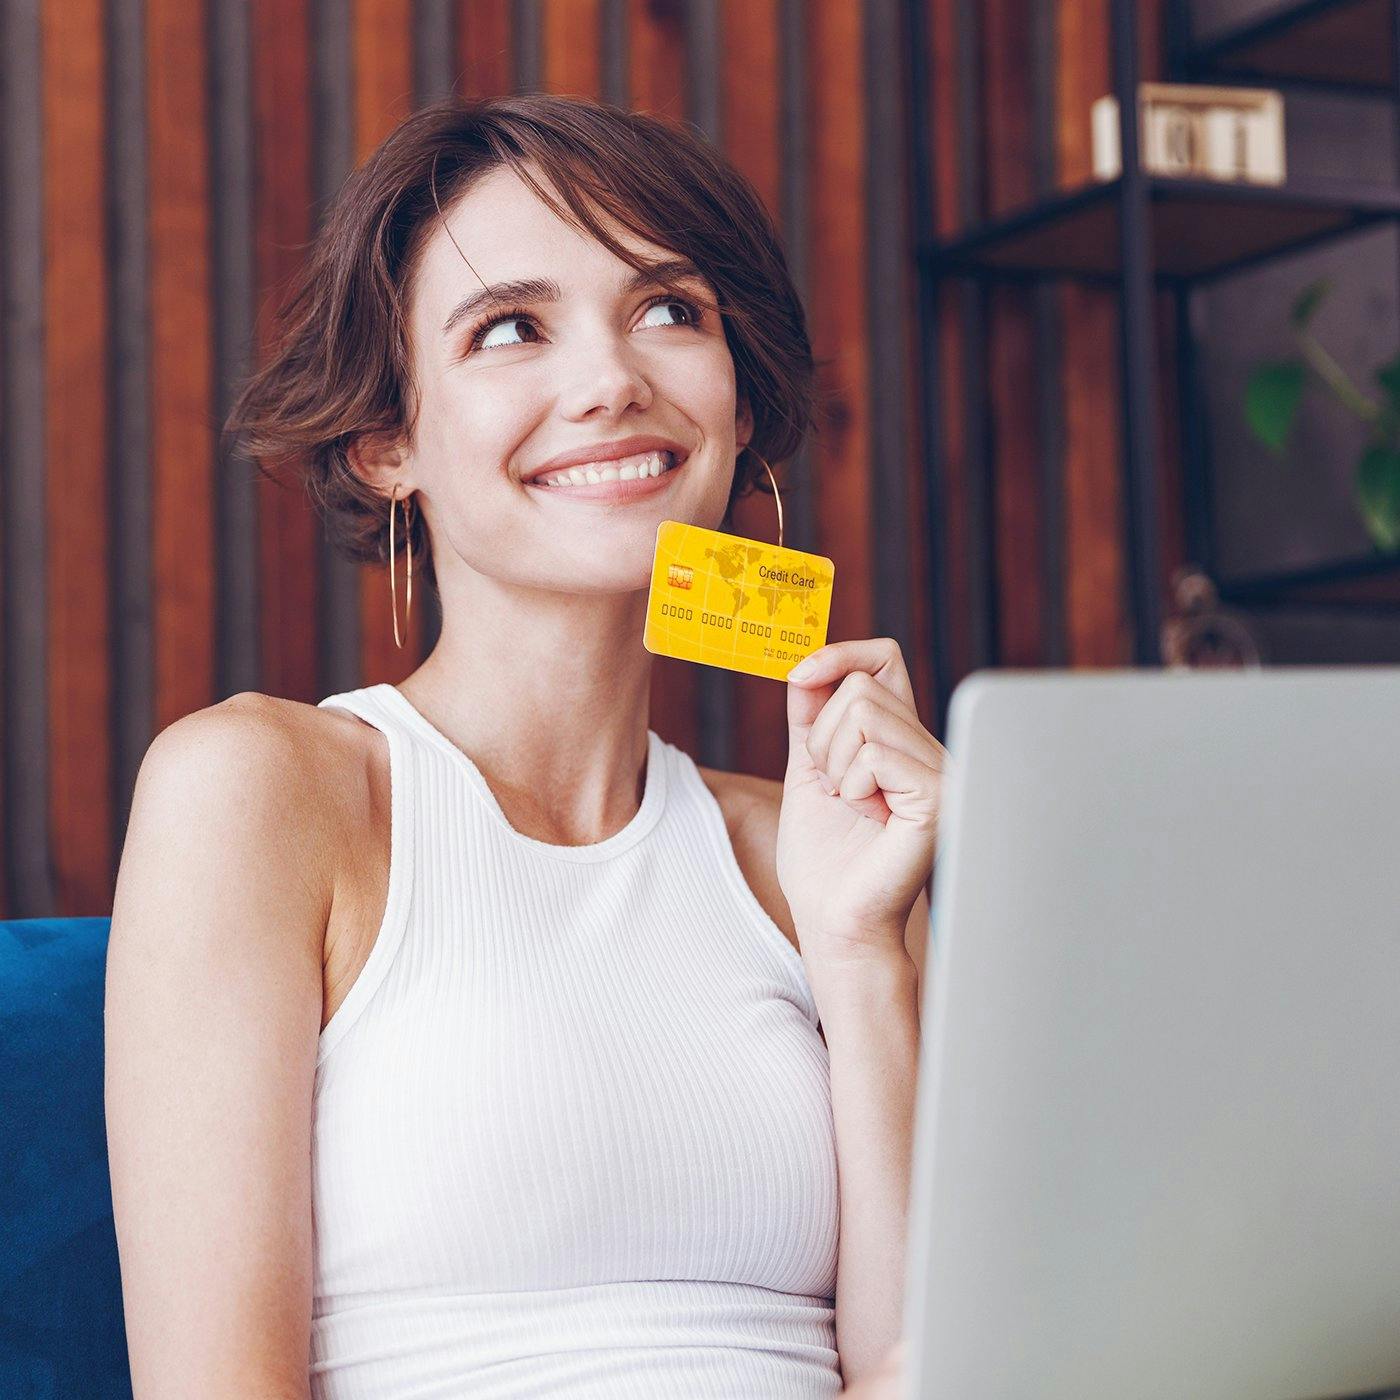 A smiling woman thinking while holding a credit card